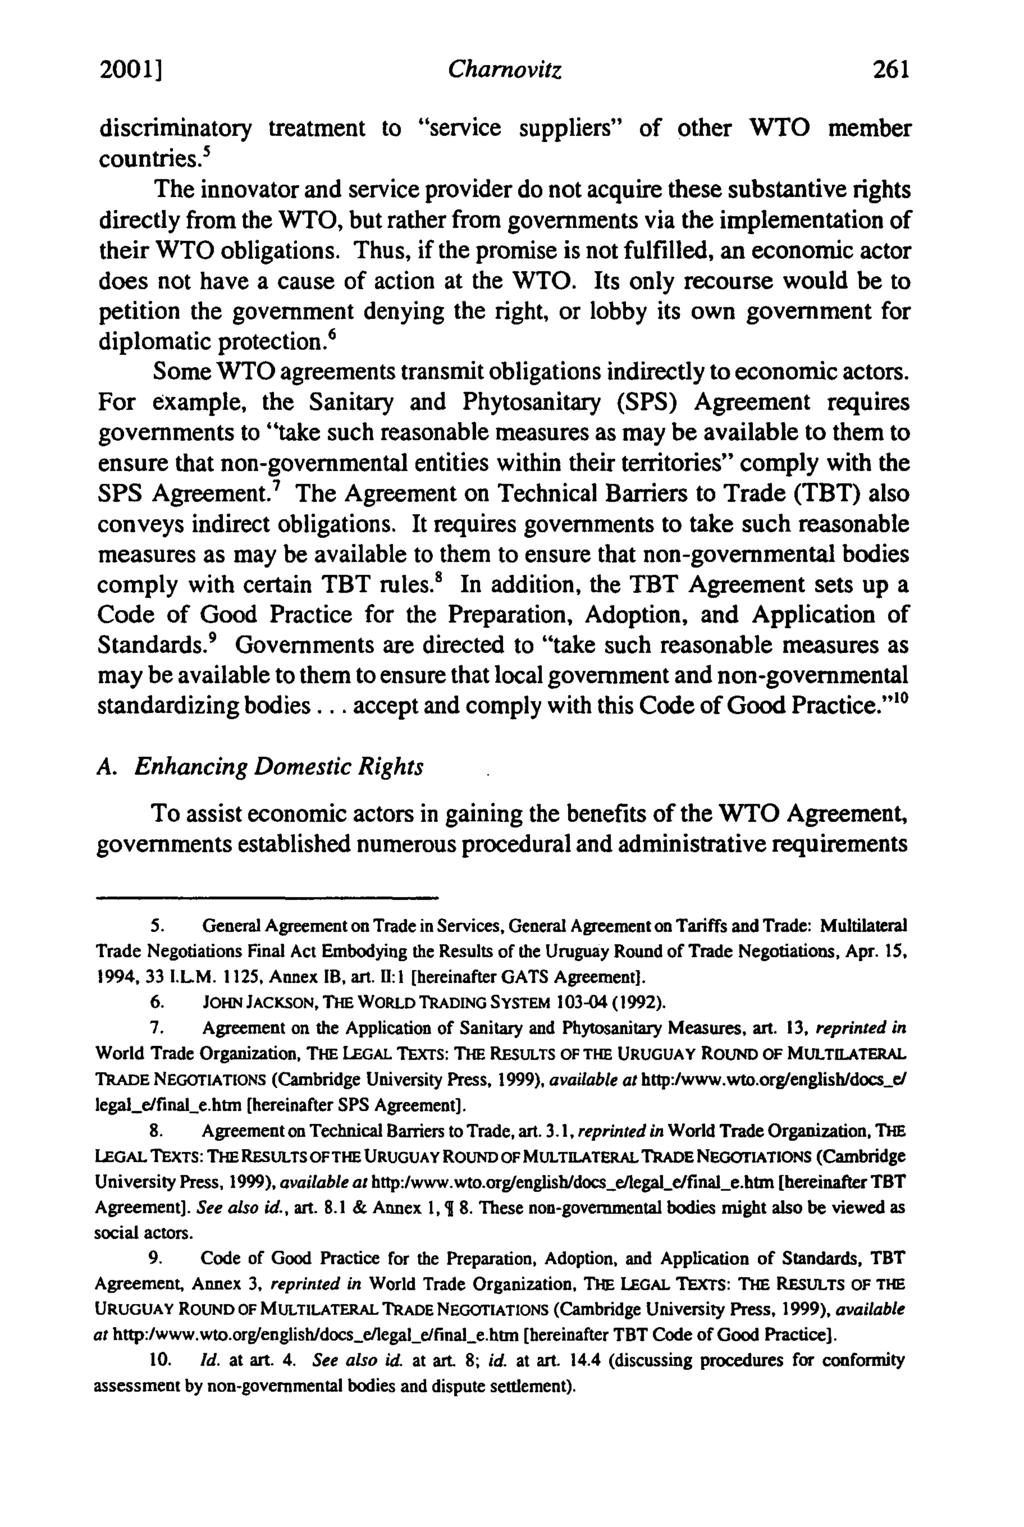 20011 Charnovitz discriminatory treatment to "service suppliers" of other WTO member countries.